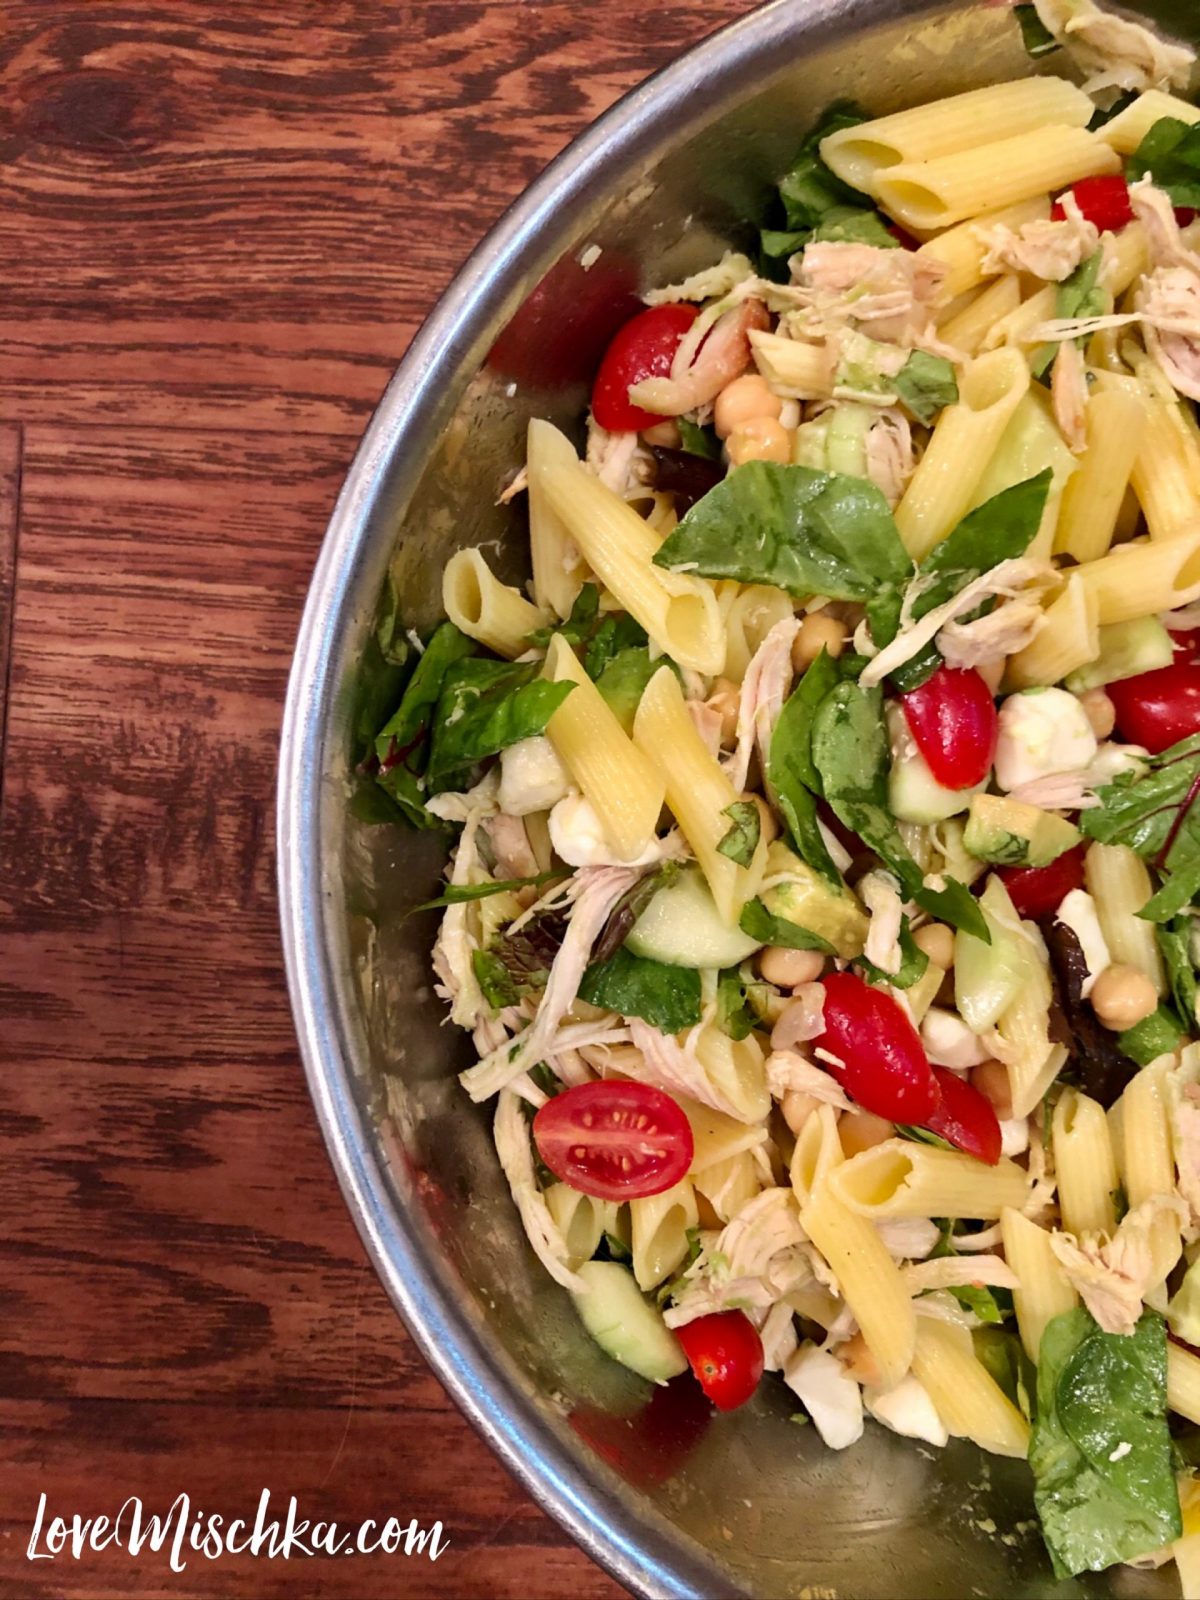 A bowl of pasta, tomatoes, chicken, basil, chickpeas, cucumbers, mozzarella, and more.